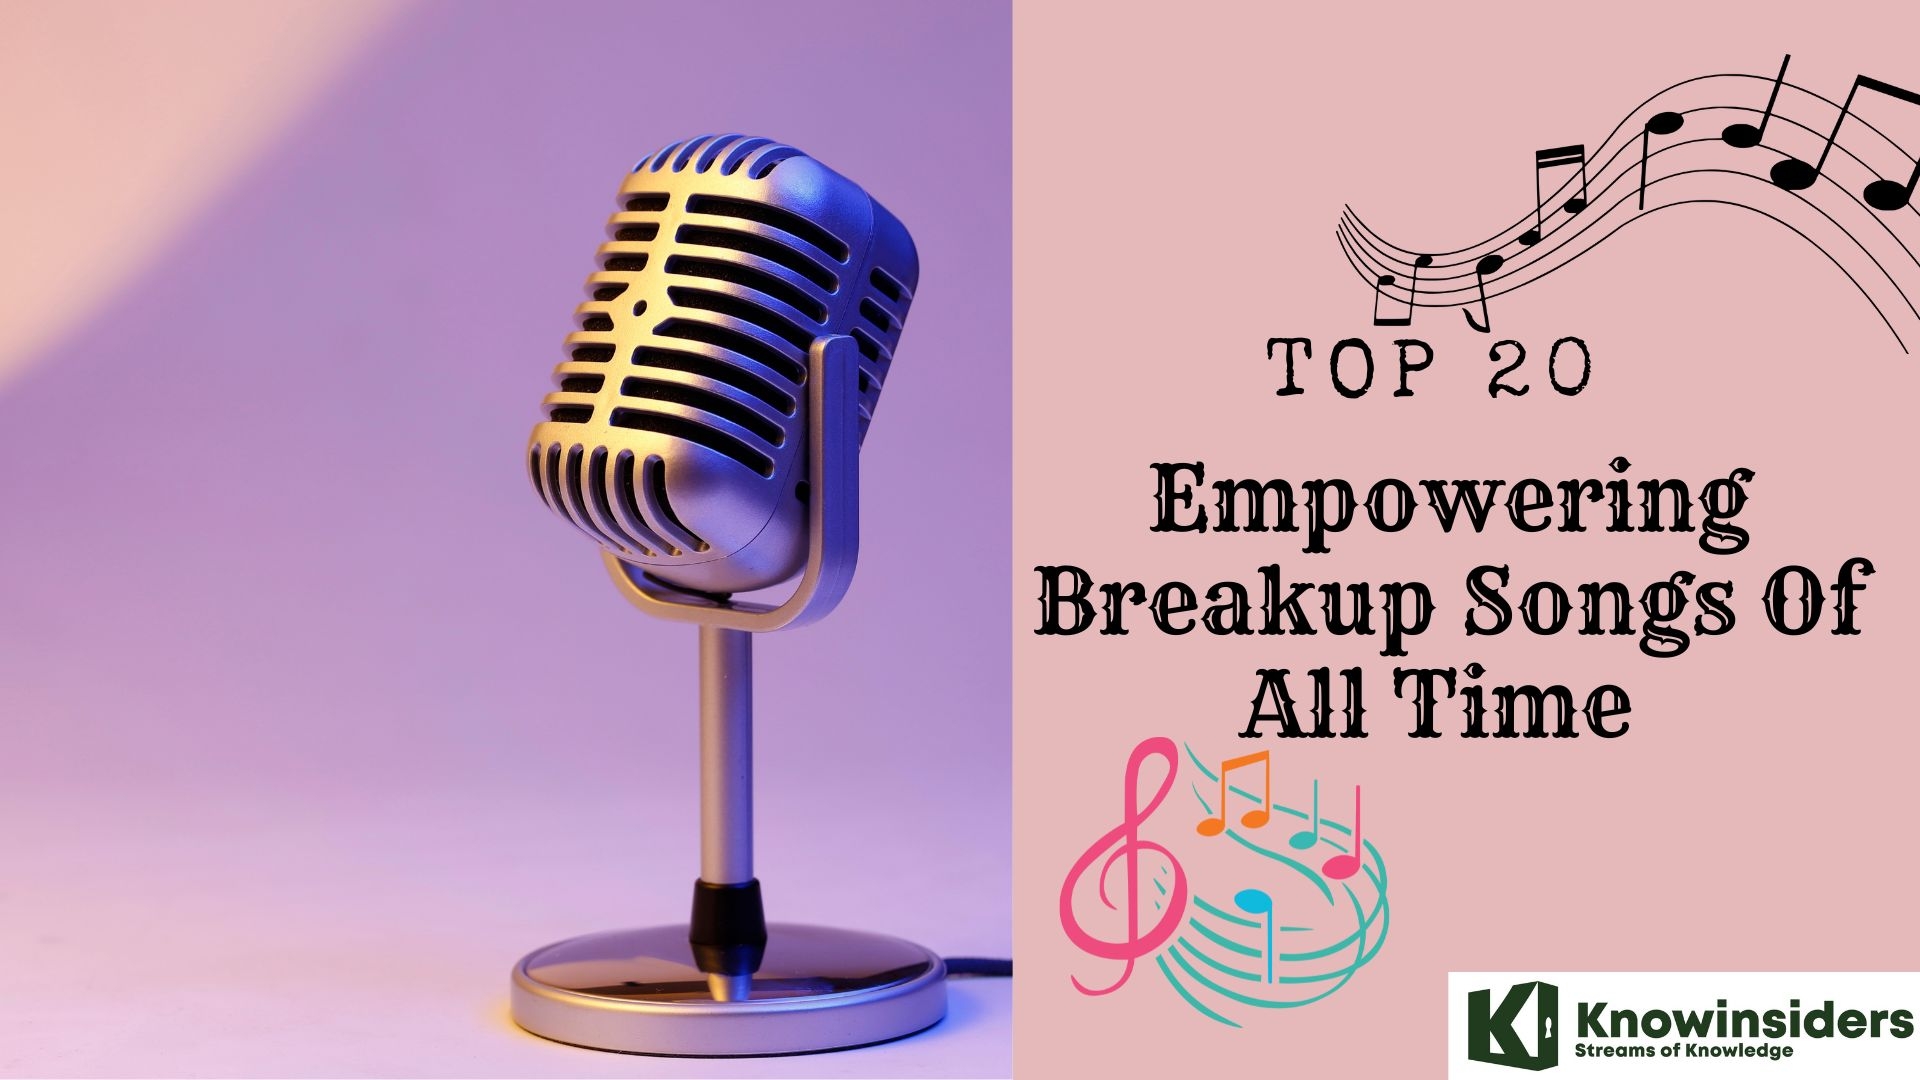 Top 20 Empowering Breakup Songs Of All Time  Knowinsiders.com 